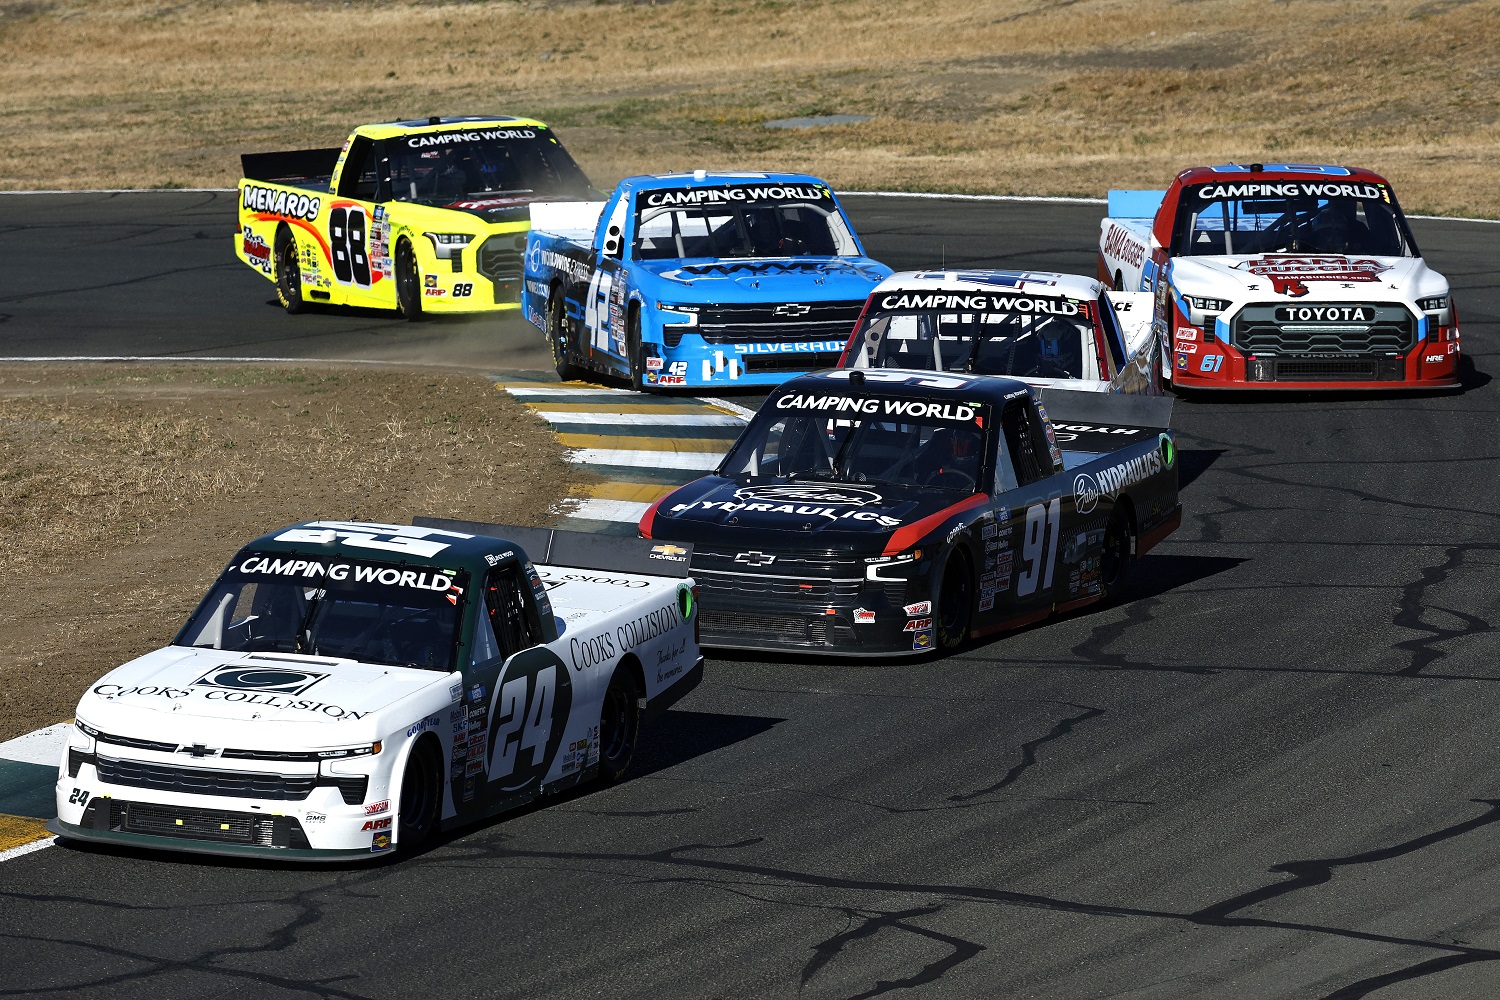 Jack Wood and Colby Howard lead the pack through a turn during the NASCAR Camping World Truck Series DoorDash 250 at Sonoma Raceway on June 11, 2022. | Sean Gardner/Getty Images